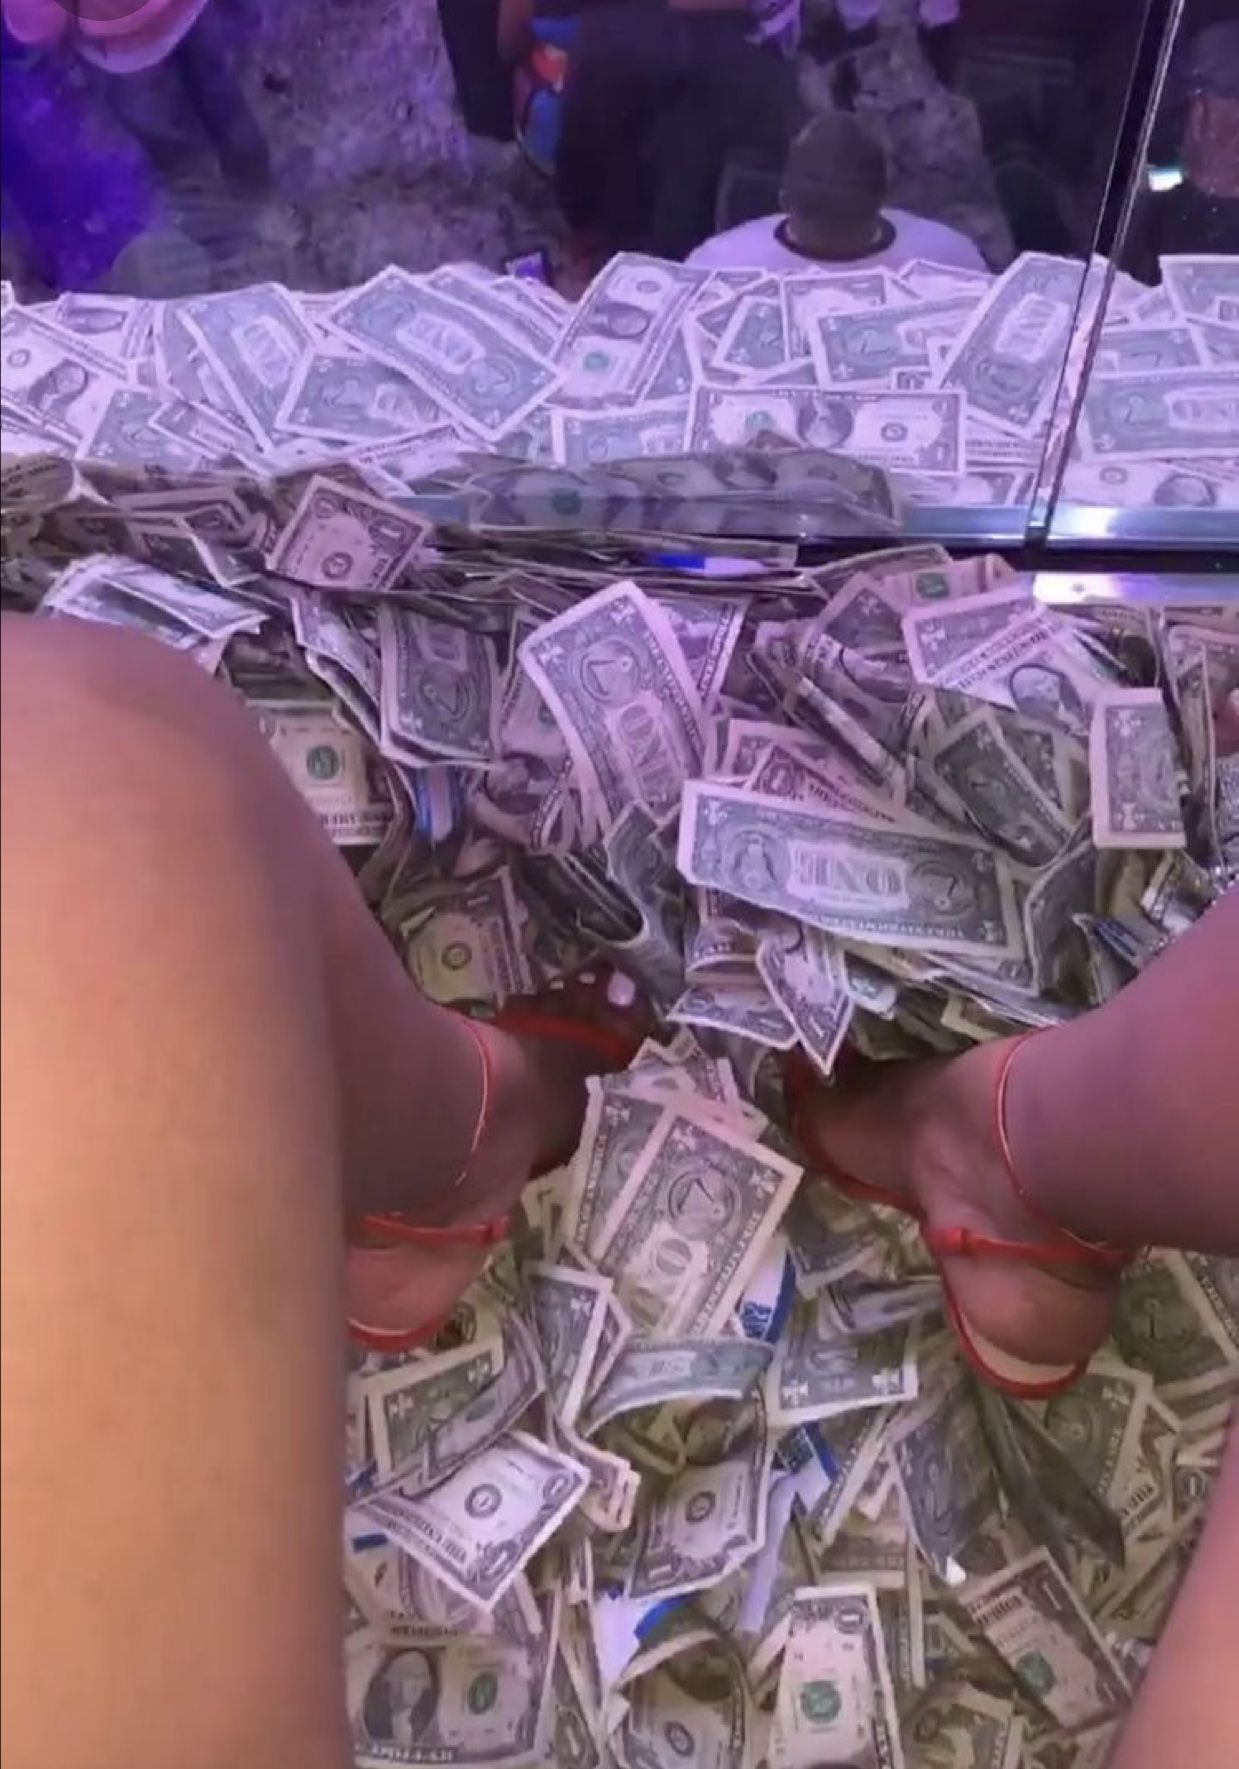 Woman stirs reactions as she sits on a bed of dollars in a club (Photos) - Money